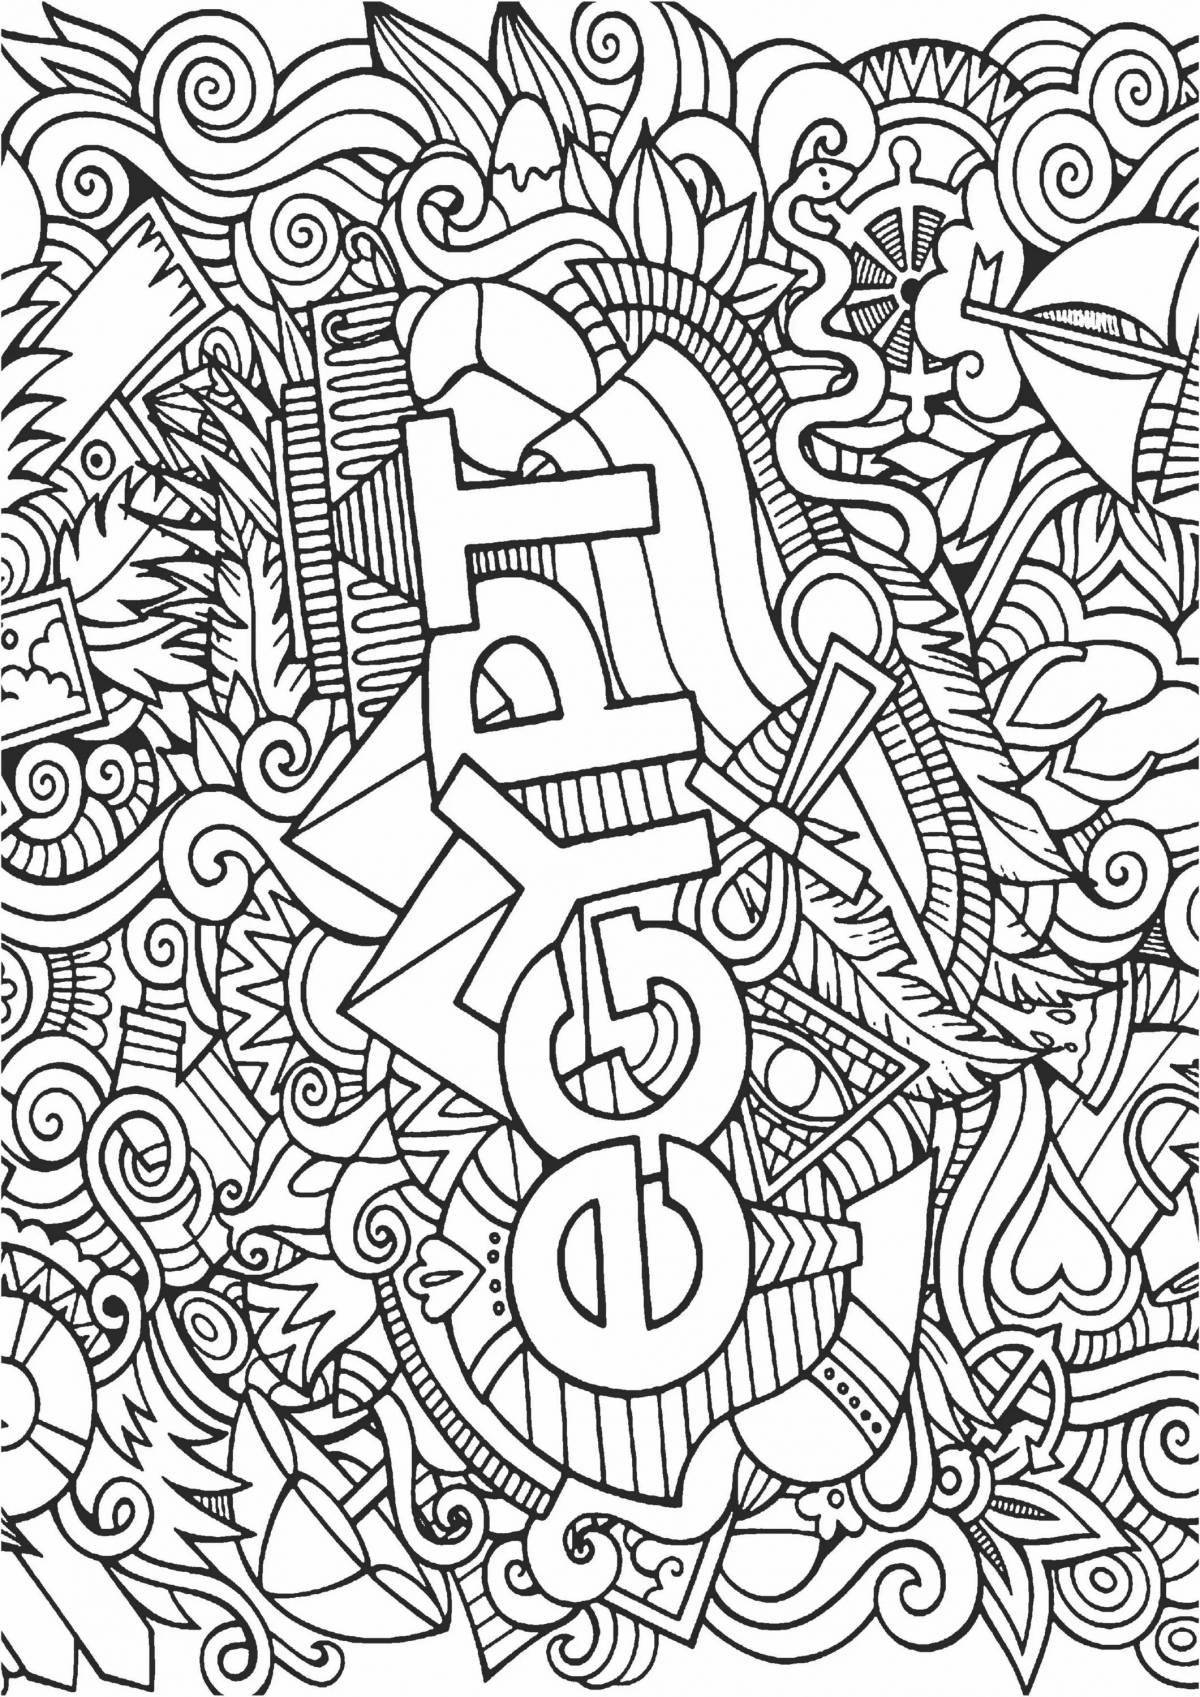 Uplifting country anti-stress coloring book